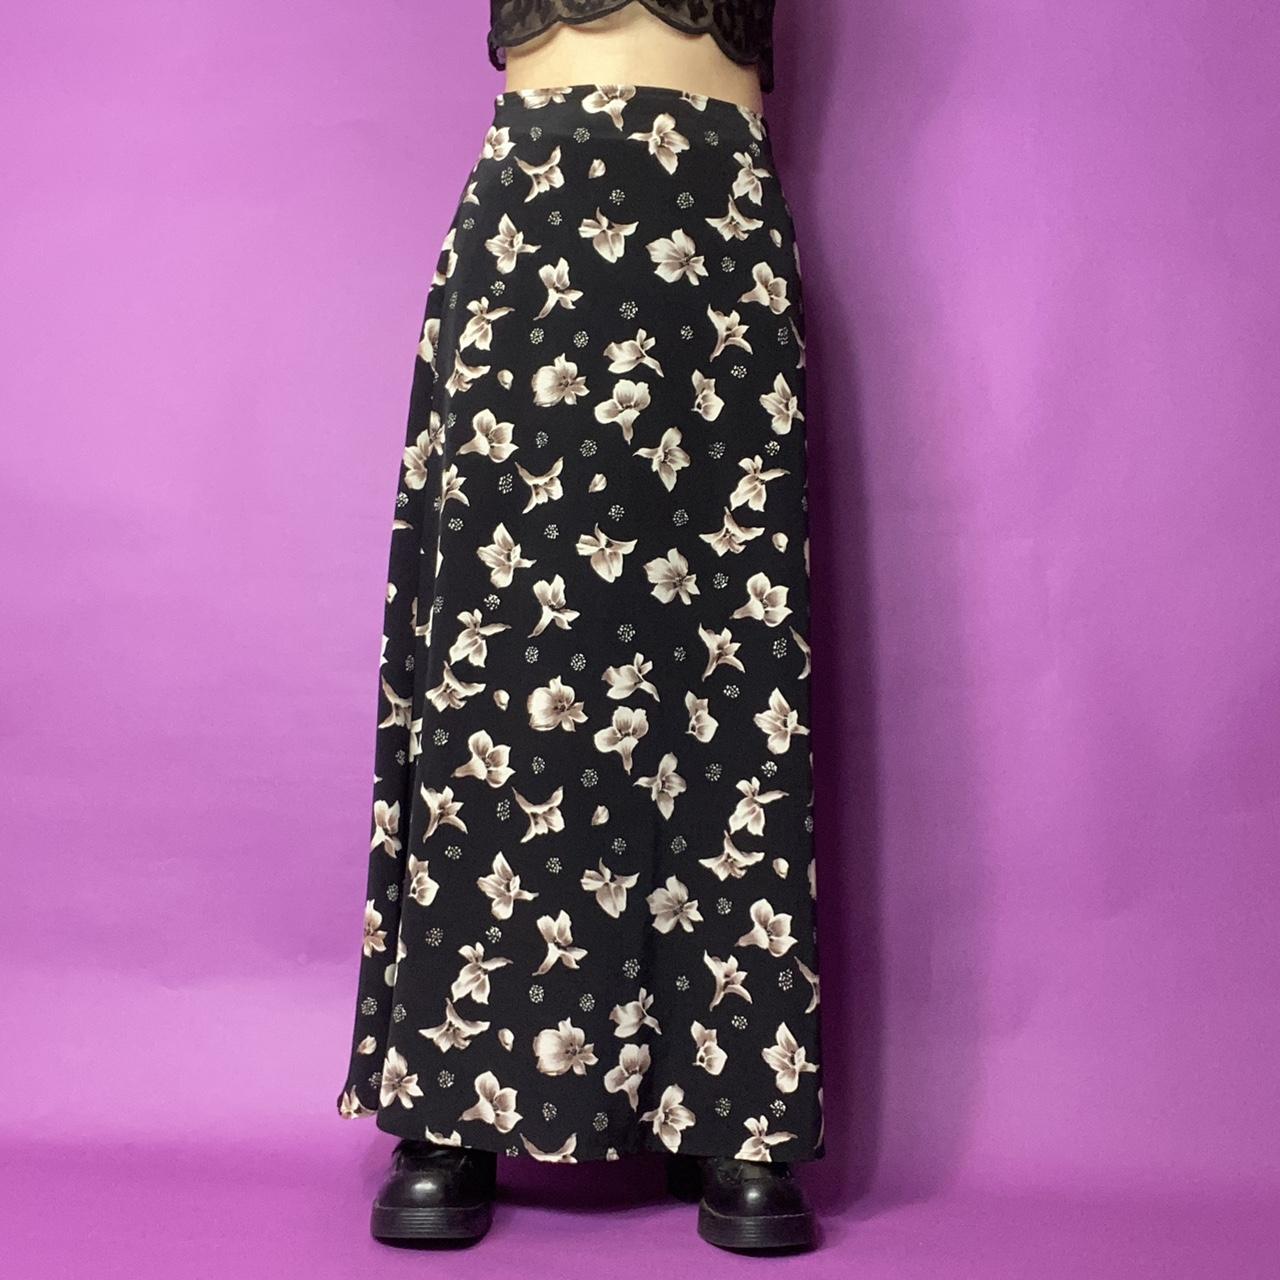 Product Image 2 - 90s floral midi skirt

by Joule